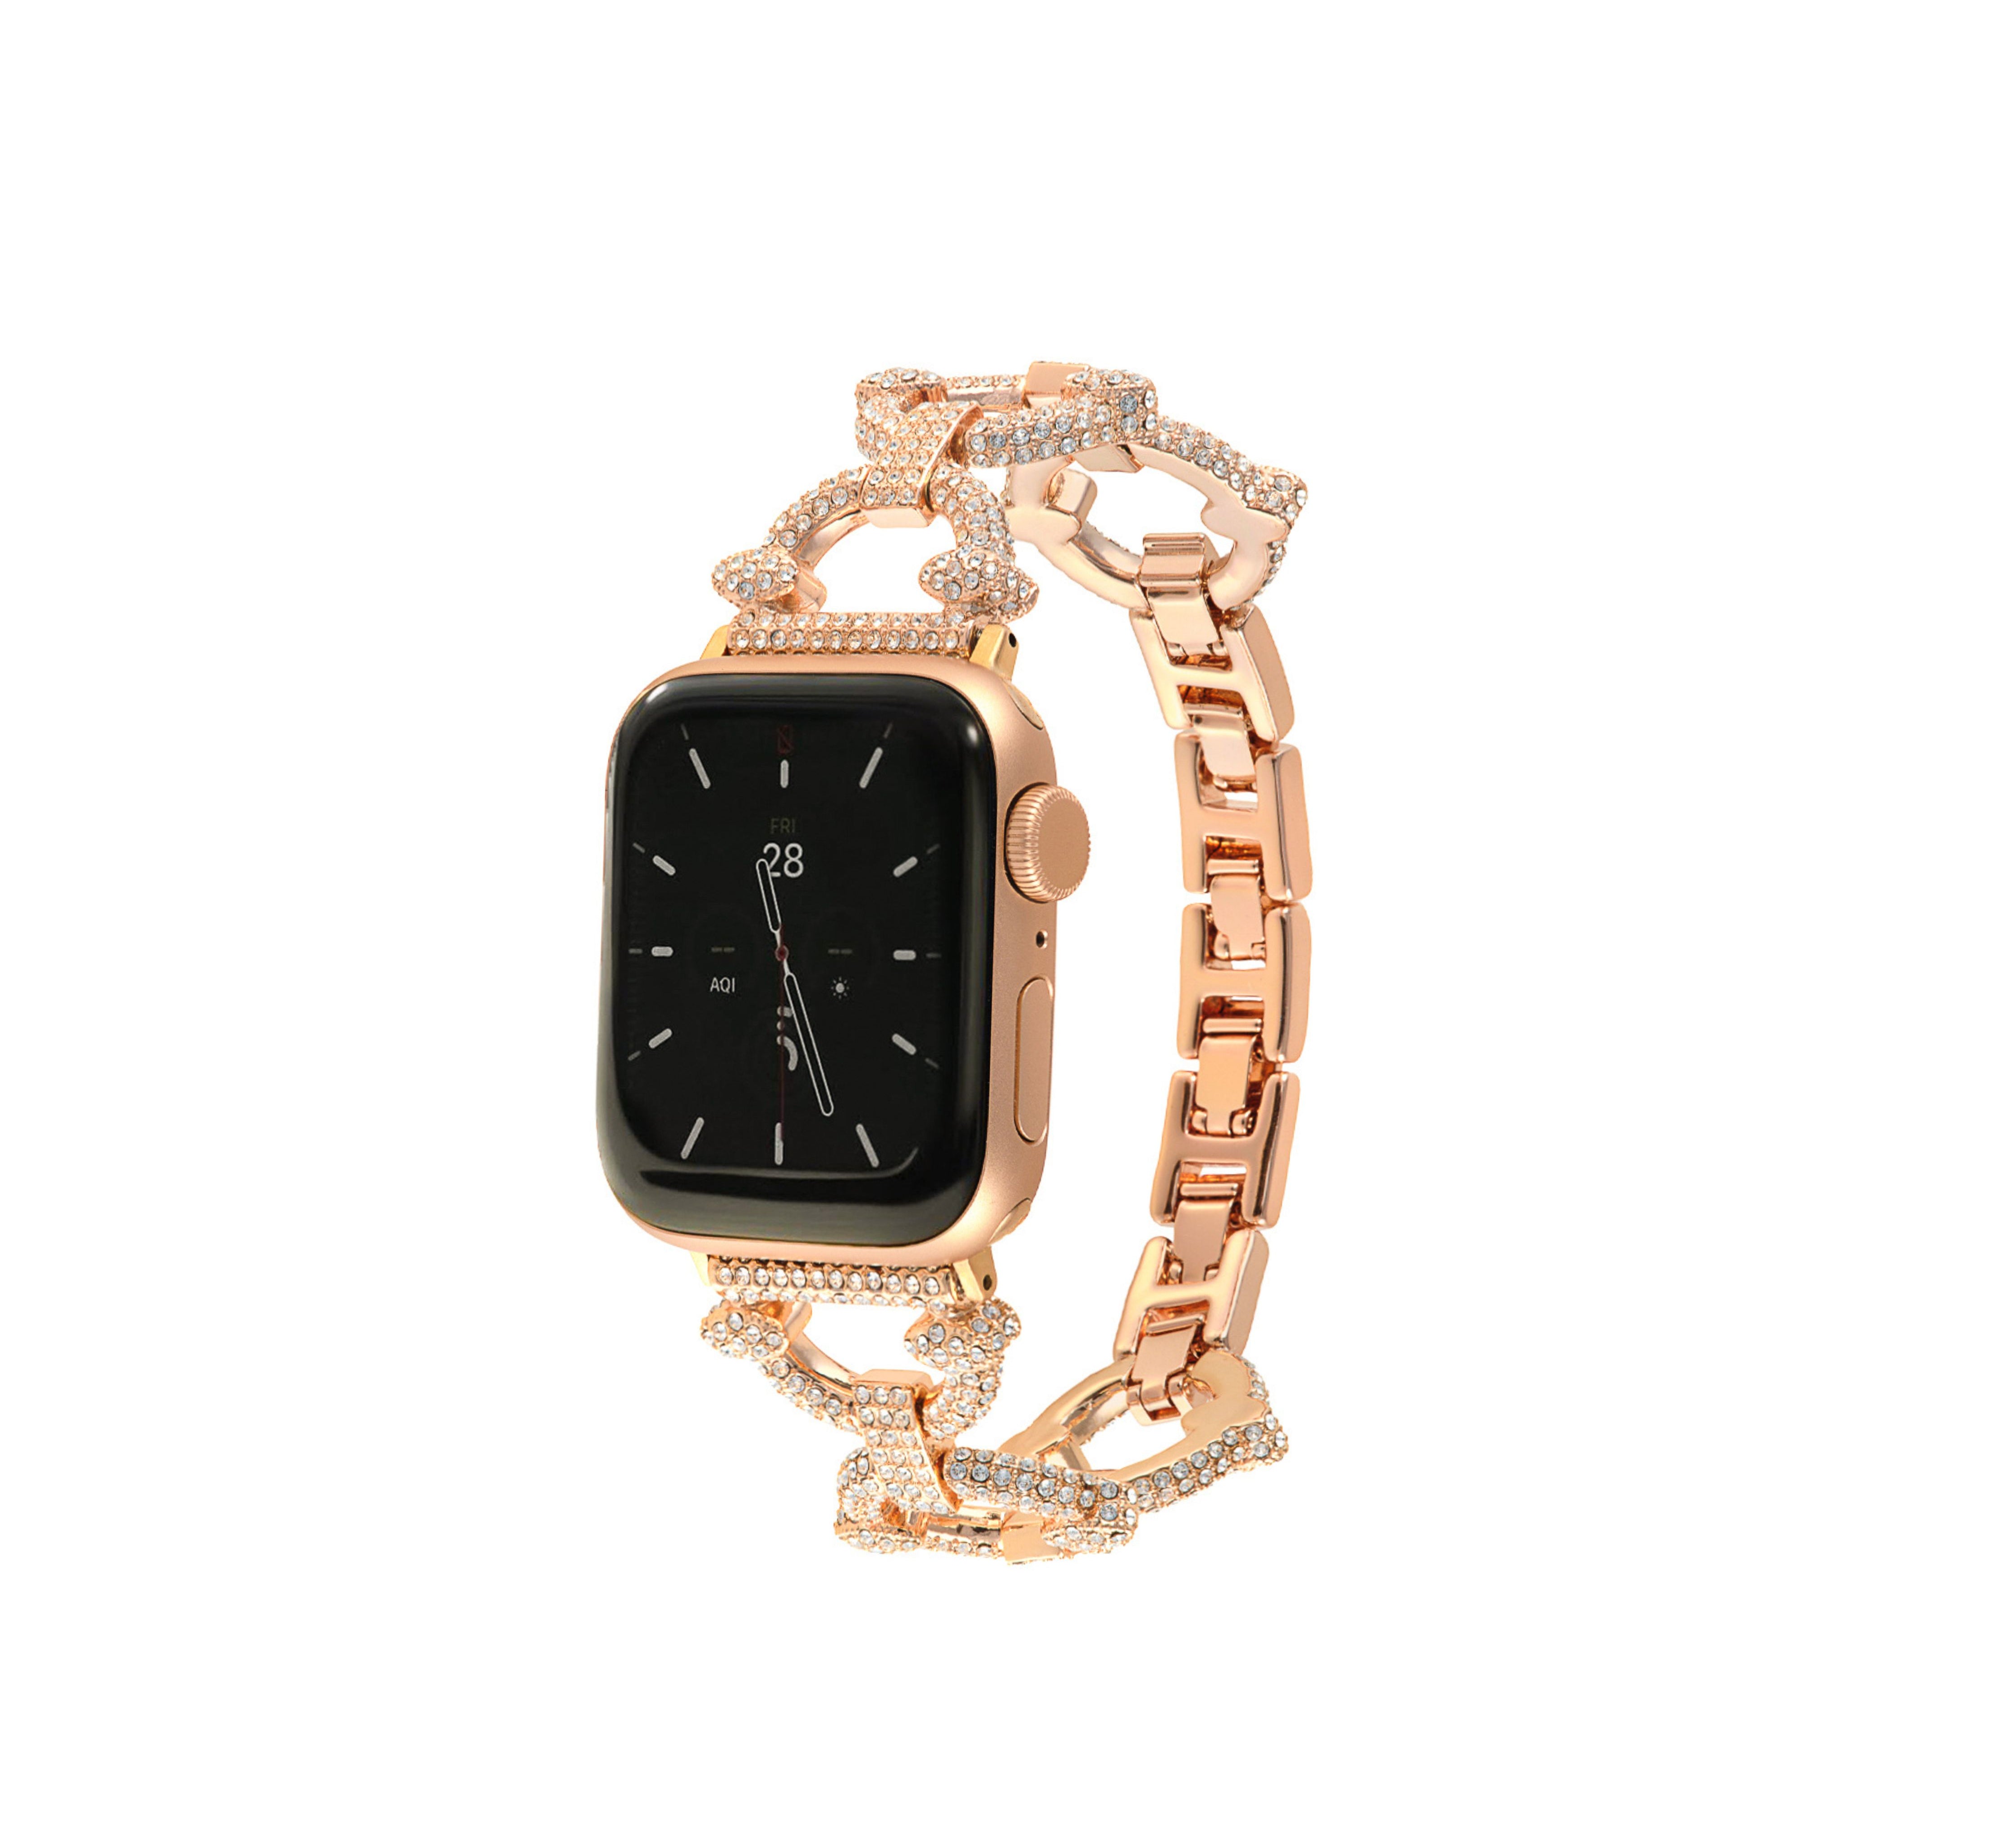 Crystal Pavé Link Band for the Apple Watch - Goldenerre Women's Apple Watch Bands and Jewelry